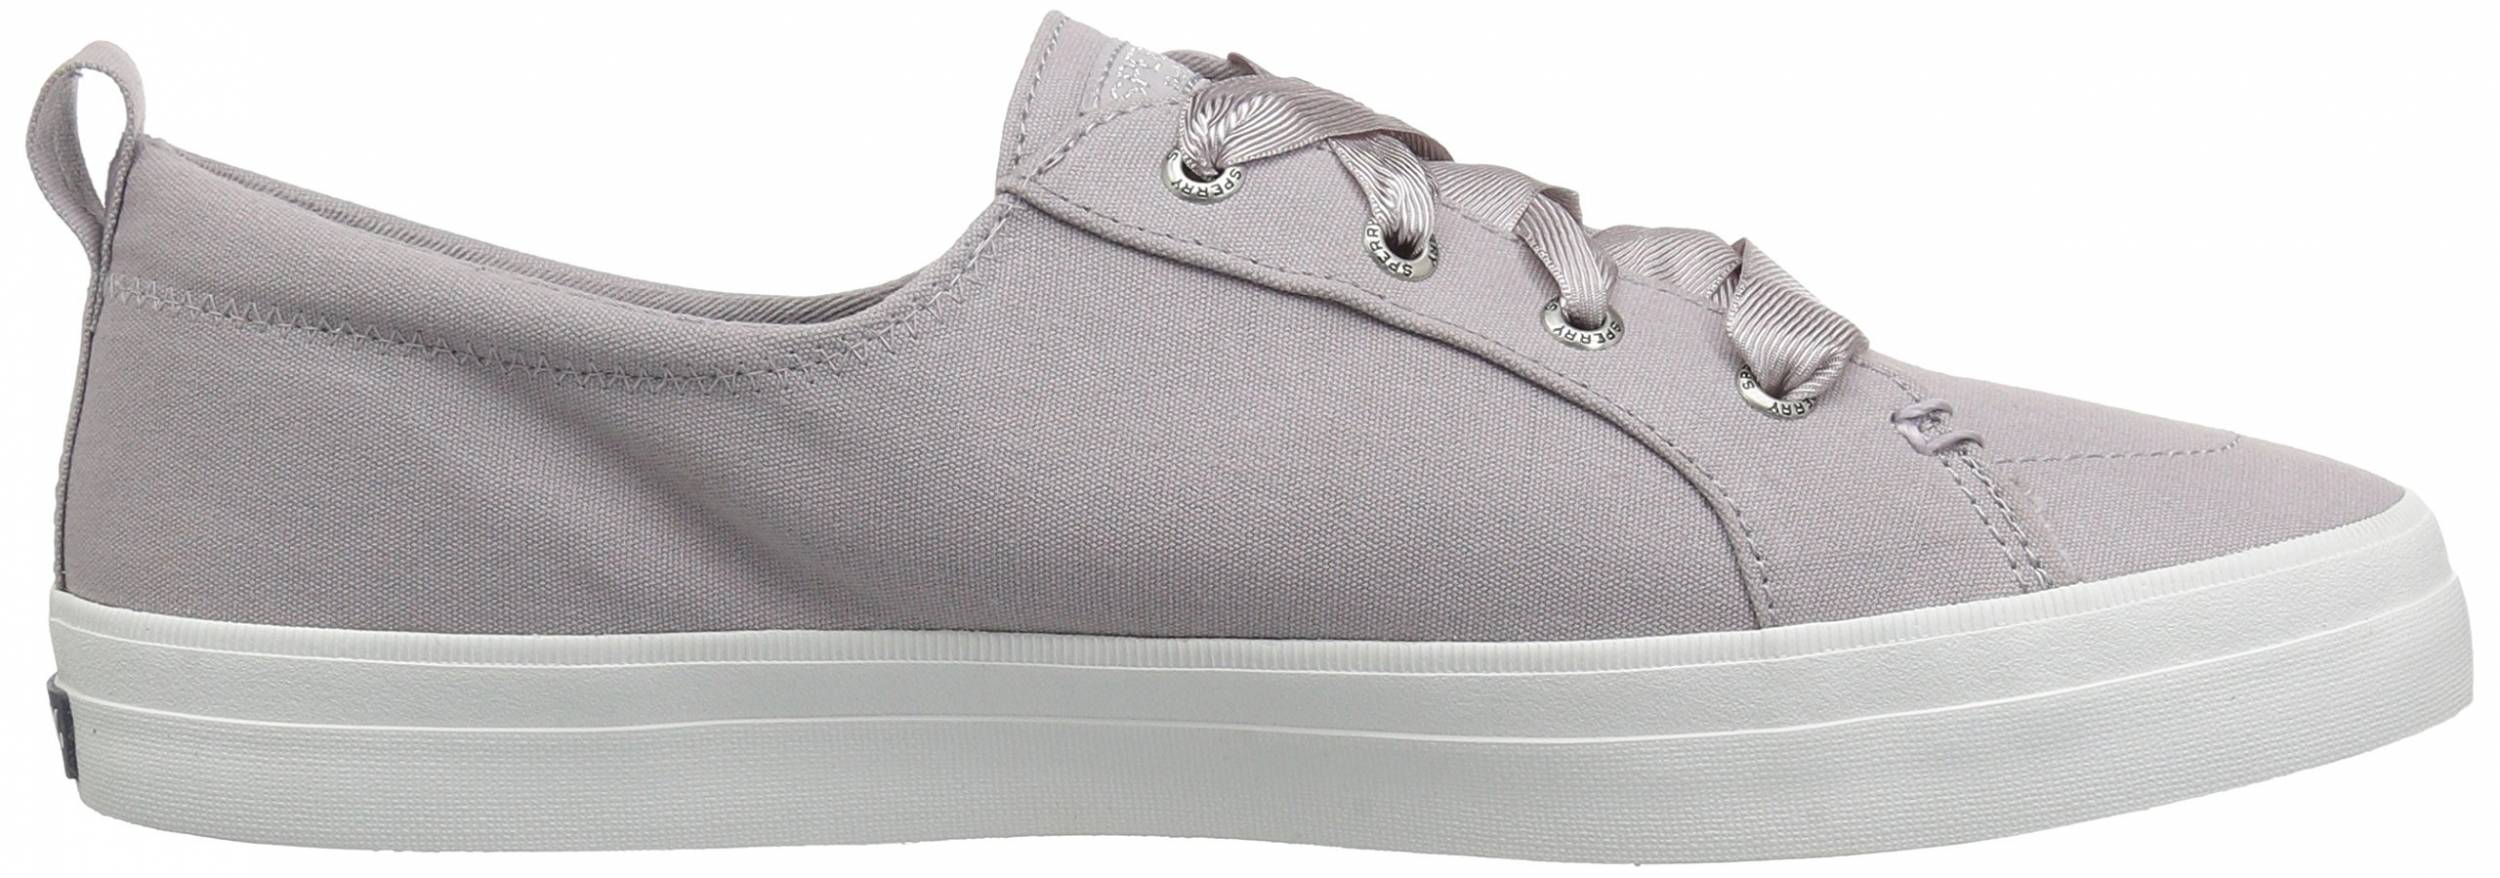 Sperry Crest Vibe Satin Lace 